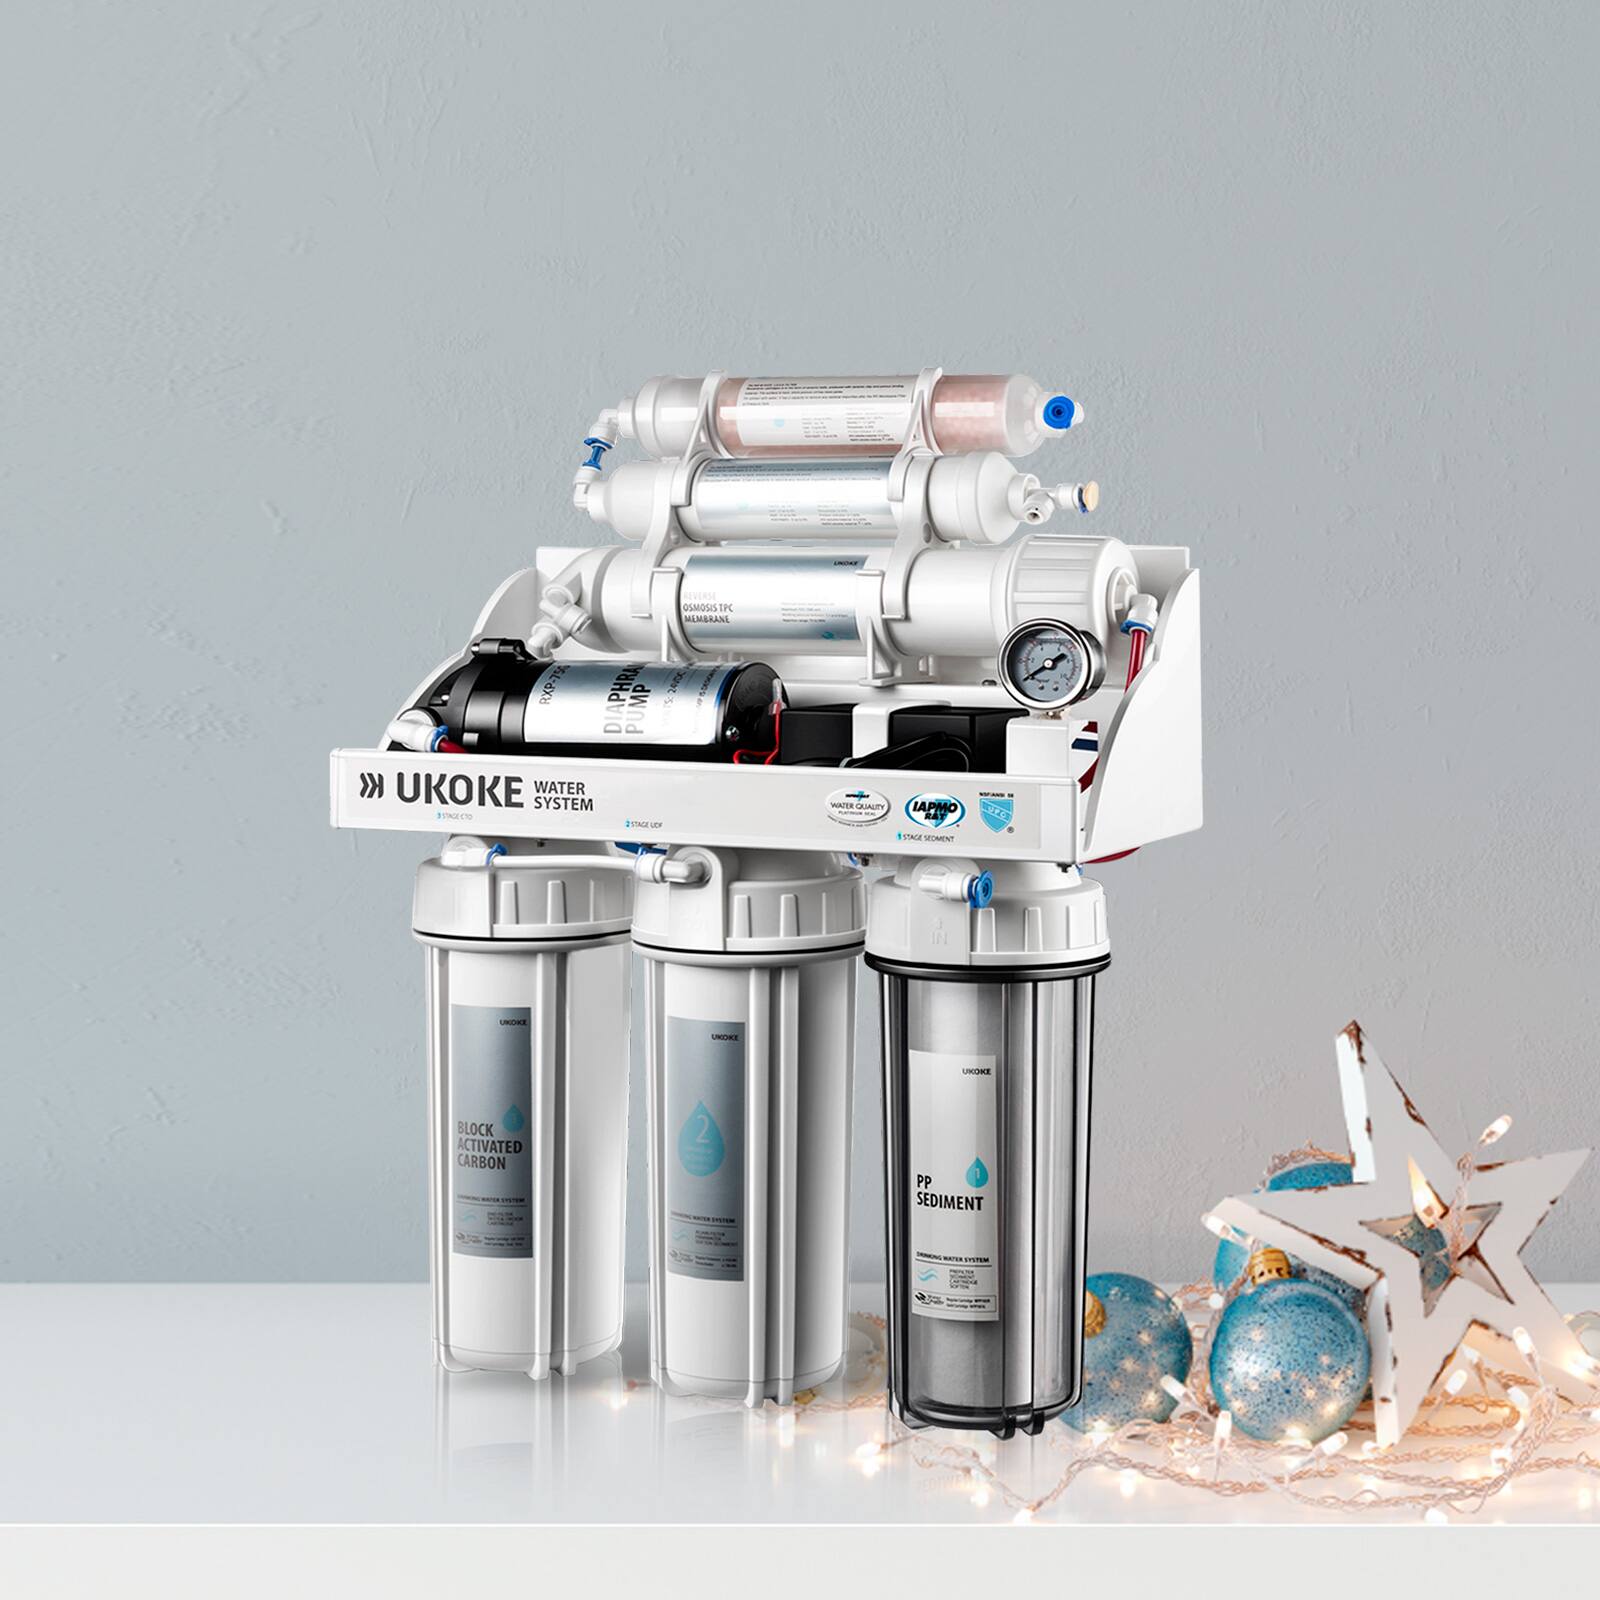 Ukoke RO8-P 6 Stages Reverse Osmosis, Water Filtration System, 75 GPD with Pump $139 + FS